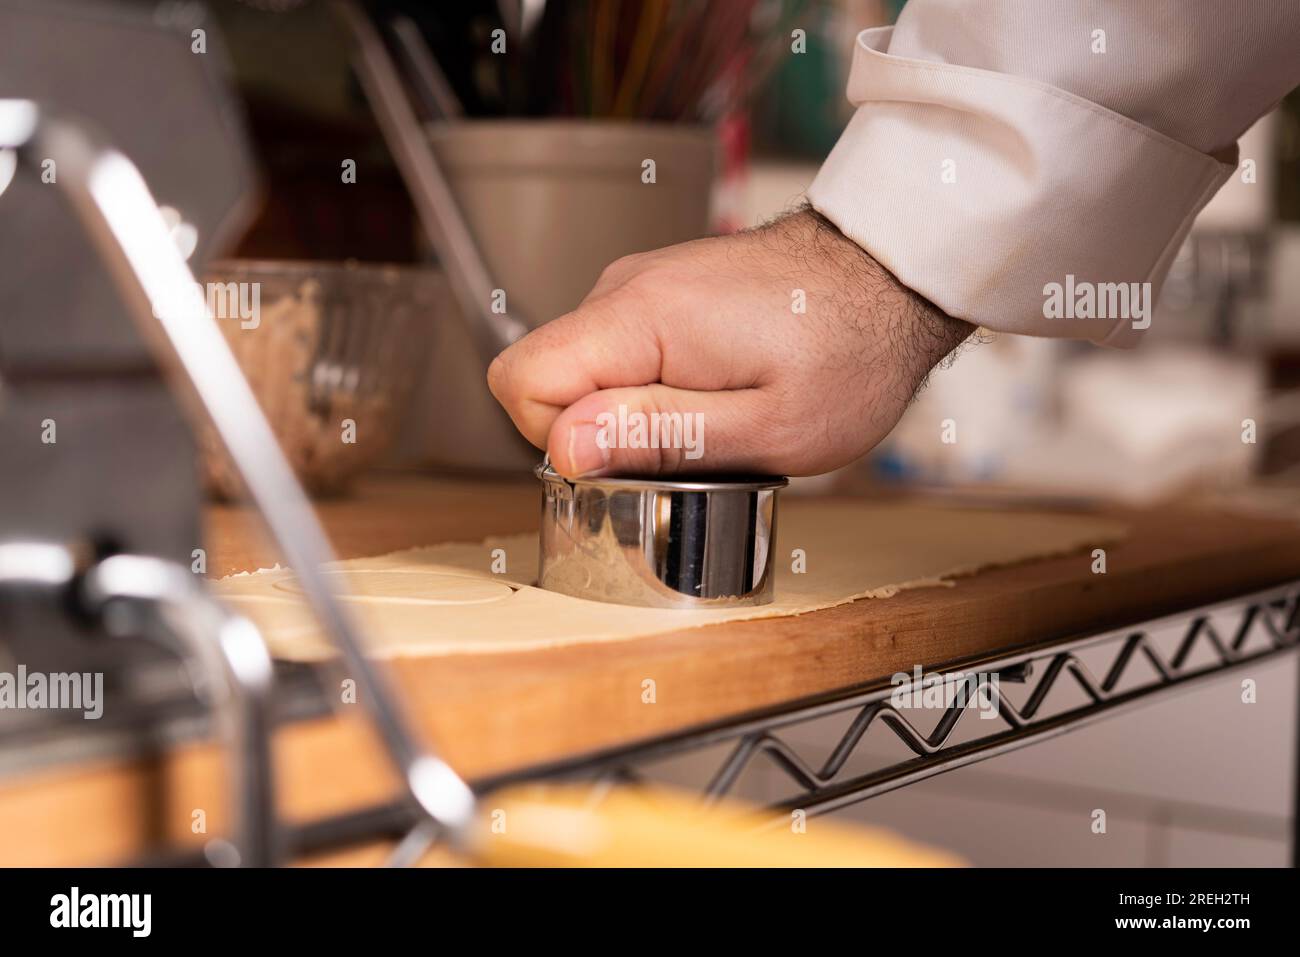 https://c8.alamy.com/comp/2REH2TH/making-pasta-and-tortellini-at-home-on-wooden-rack-and-chrome-pasta-maker-2REH2TH.jpg